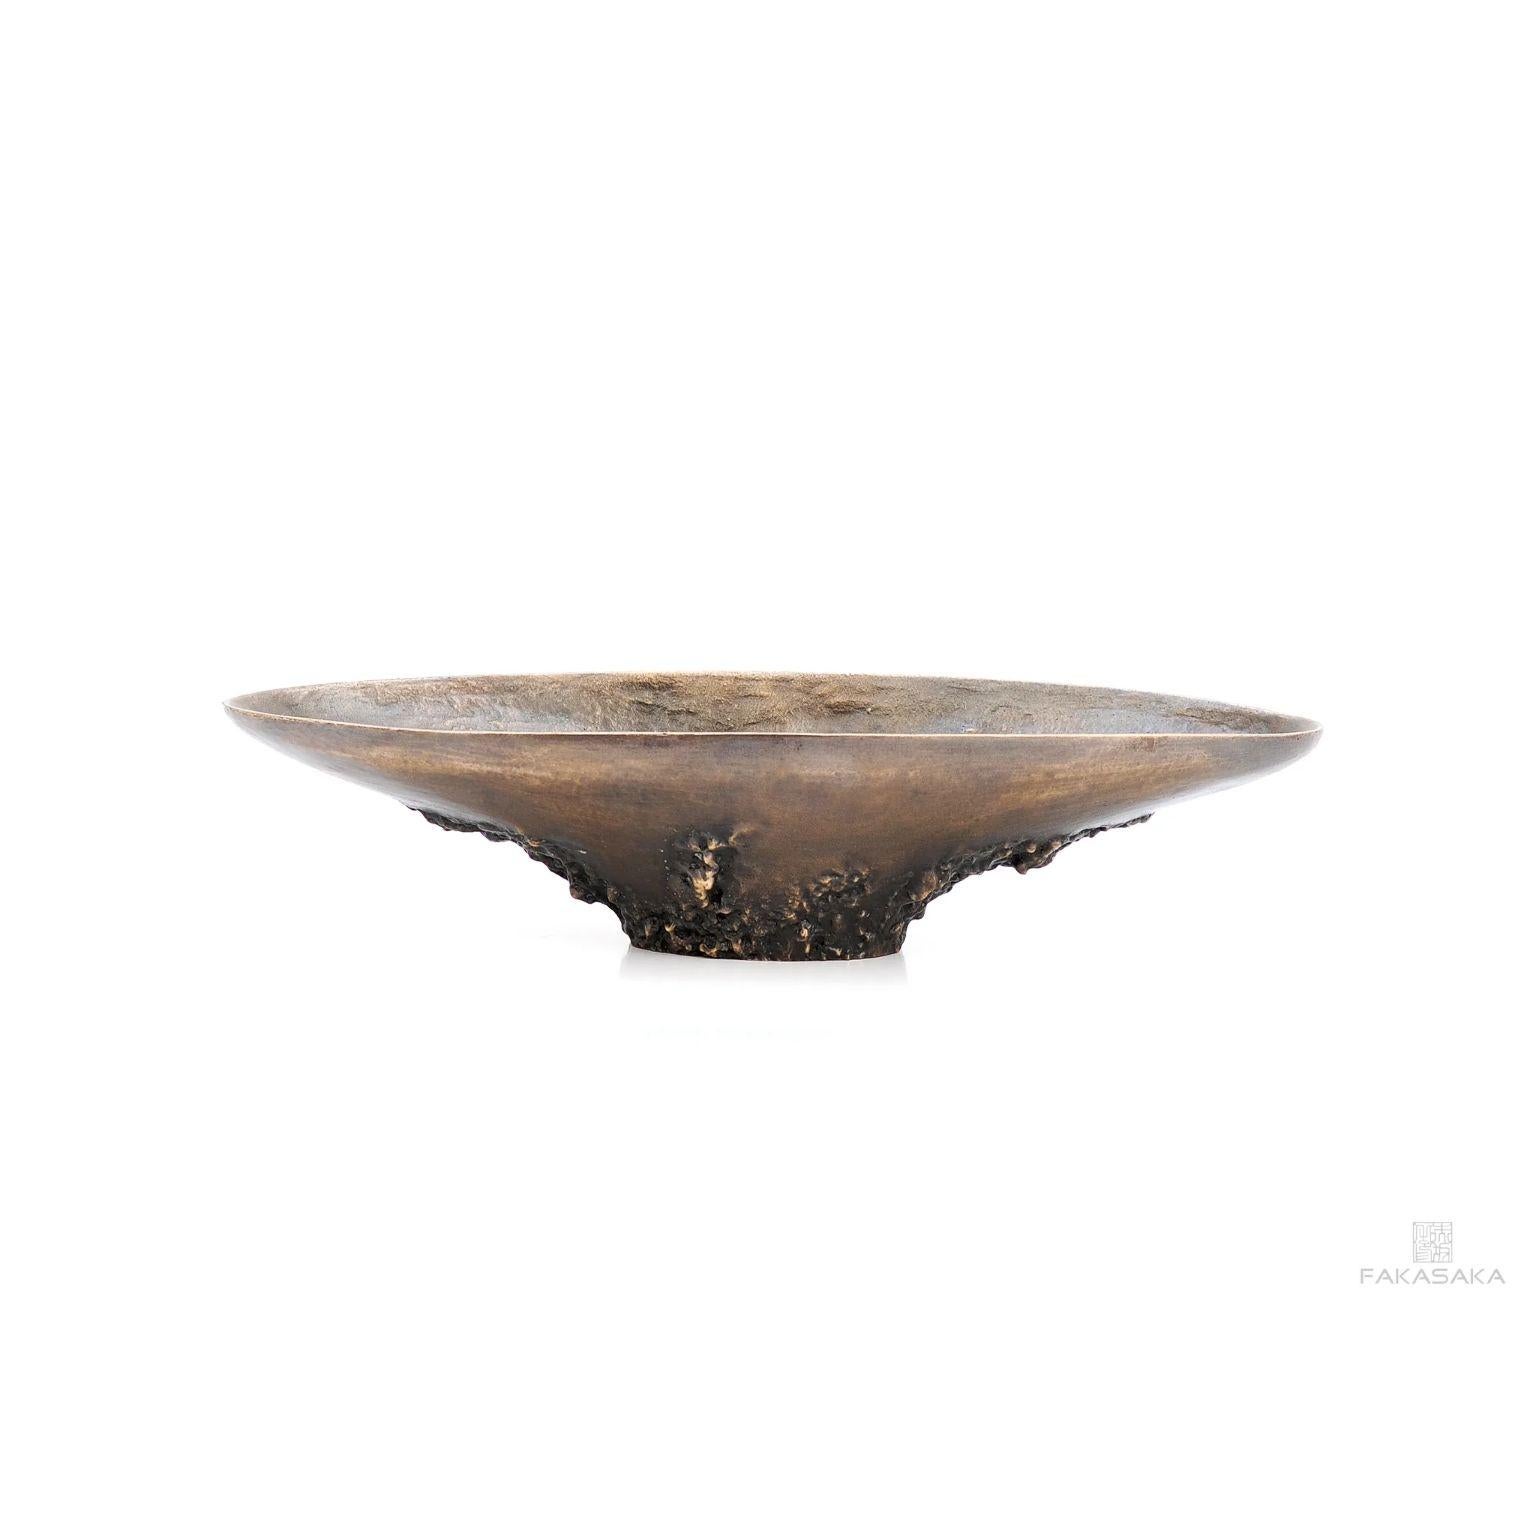 O'Connor bowl by Fakasaka Design
Dimensions: W 41.5 cm D 16 cm H 9.5 cm.
Materials: dark bronze.

 FAKASAKA is a design company focused on production of high-end furniture, lighting, decorative objects, jewels, and accessories.

Established in